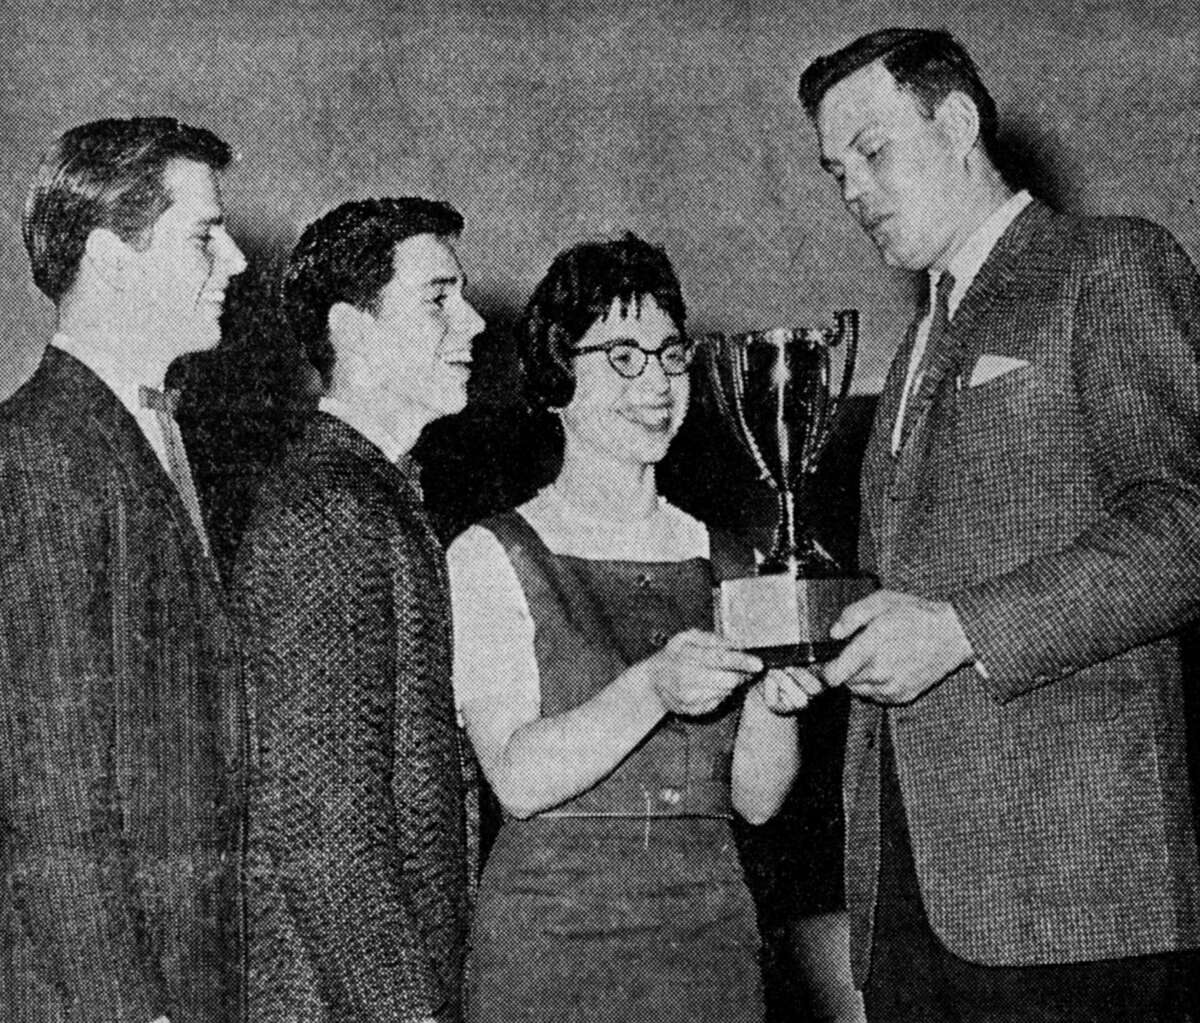 The vocal trio of David, Roger and Annette Brian representing Norman-Dickson High School receive a trophy Saturday night form Harvey Kirchoff (right) by virtue of their winning the Jaycee Talent Contest during the annual Manistee Home Builders Auto Show. The photo was published in the News Advocate on March 19, 1962.